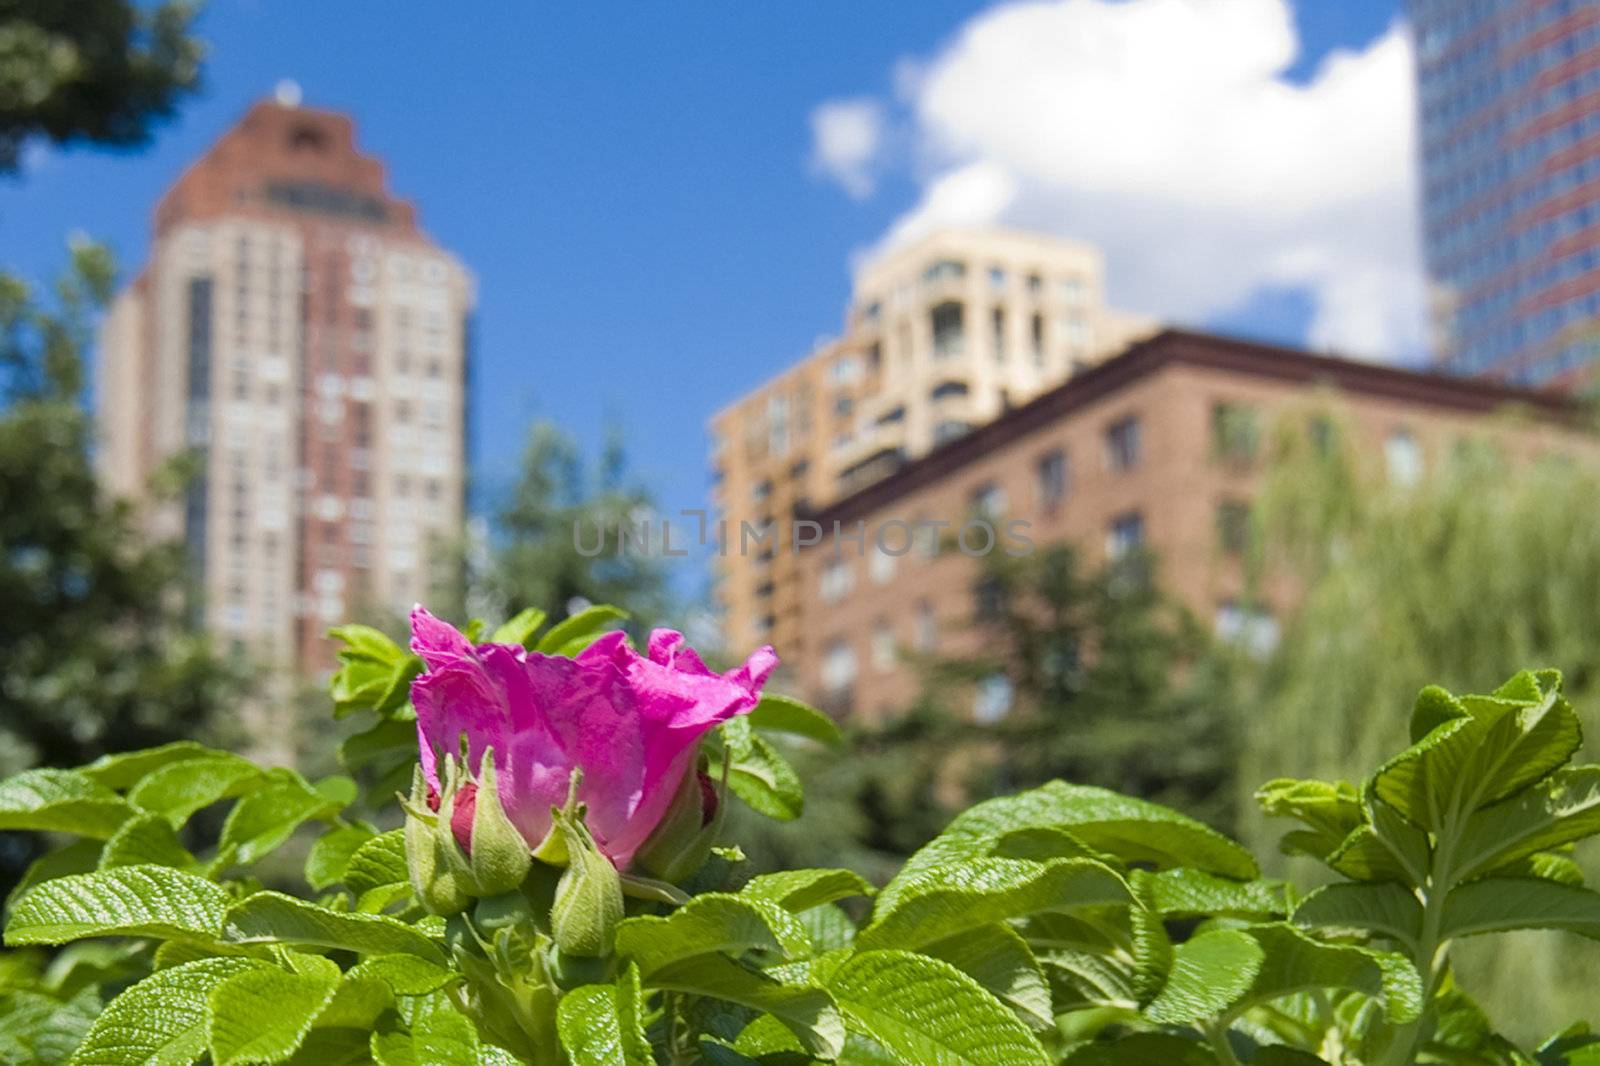 A flower alone against the skyscrapers